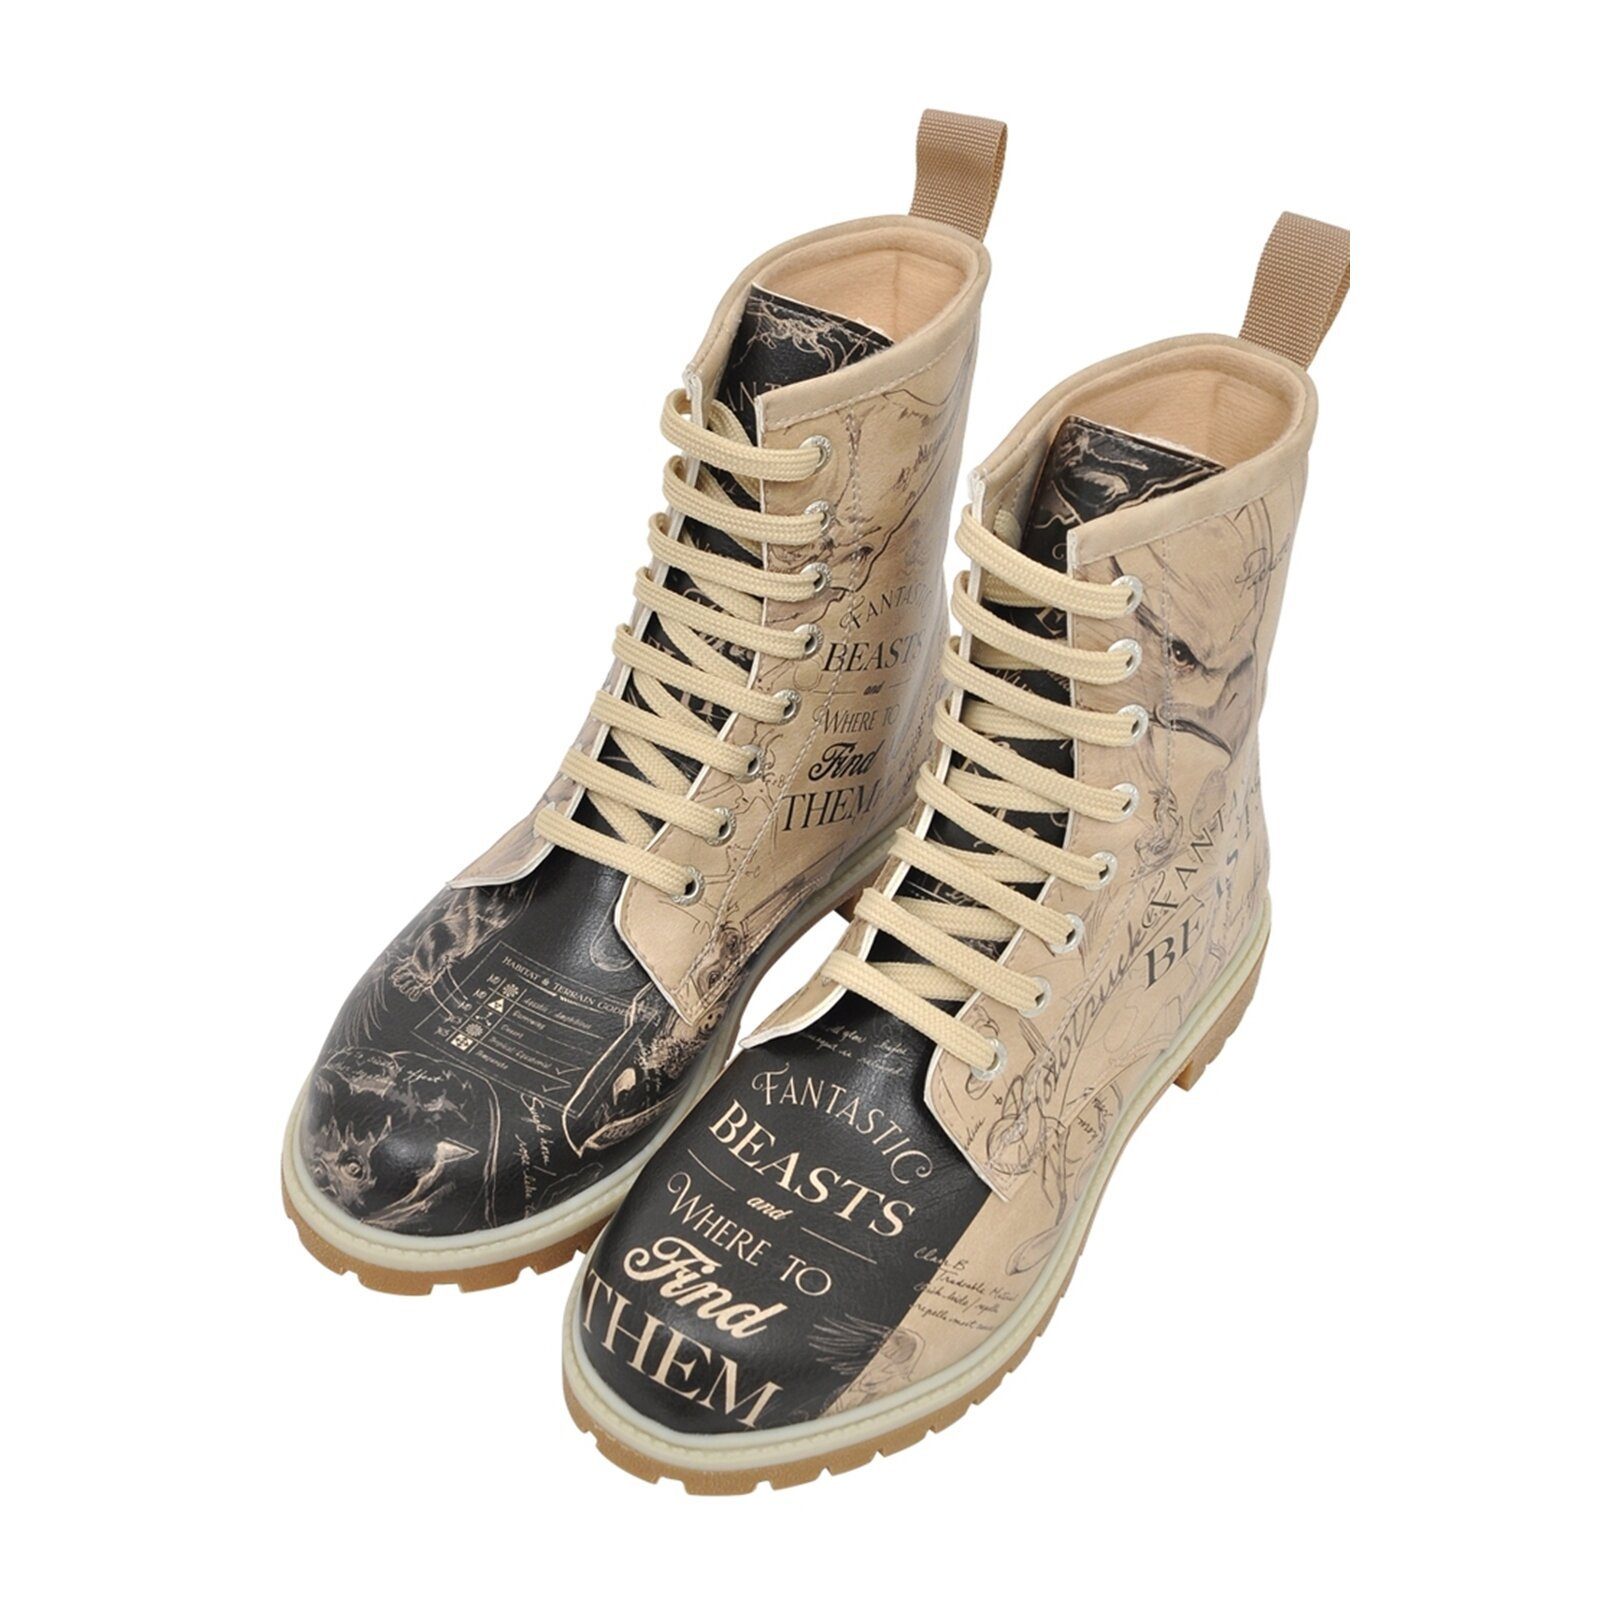 DOGO »I want to be a Wizard Fantastic Beasts« Stiefel Vegan online kaufen |  OTTO